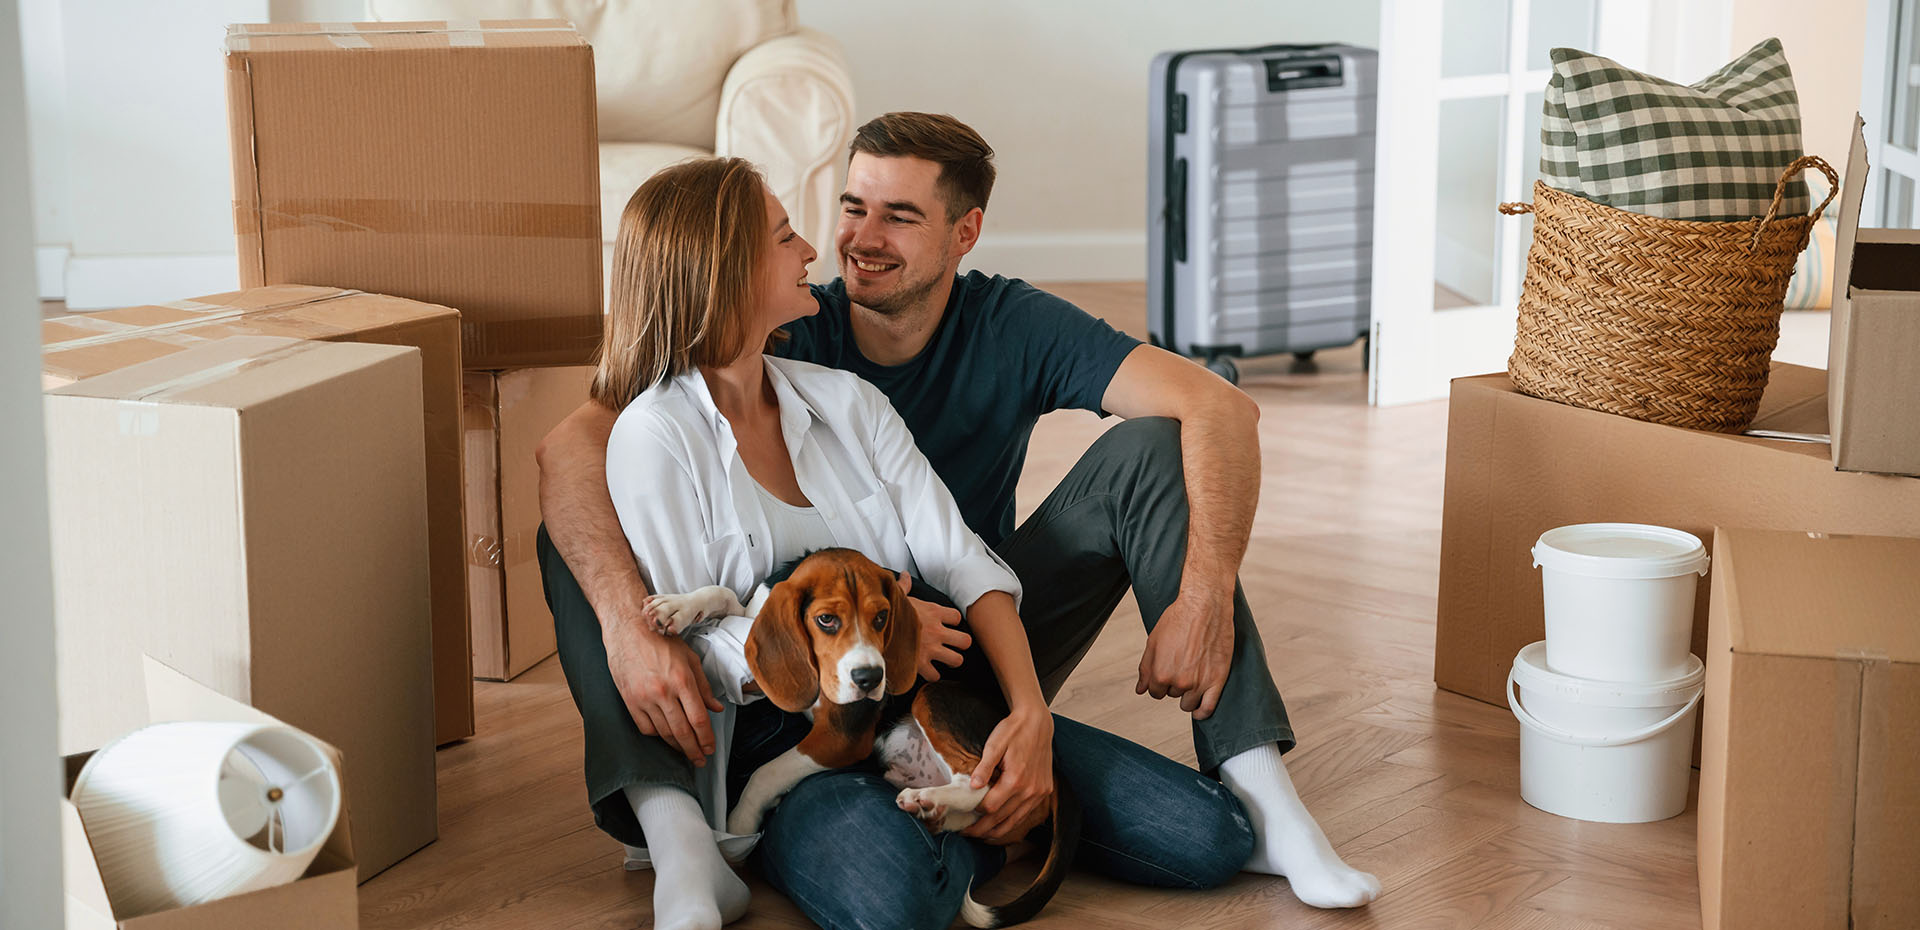 Image showing a couple with their dog surrounded by boxes